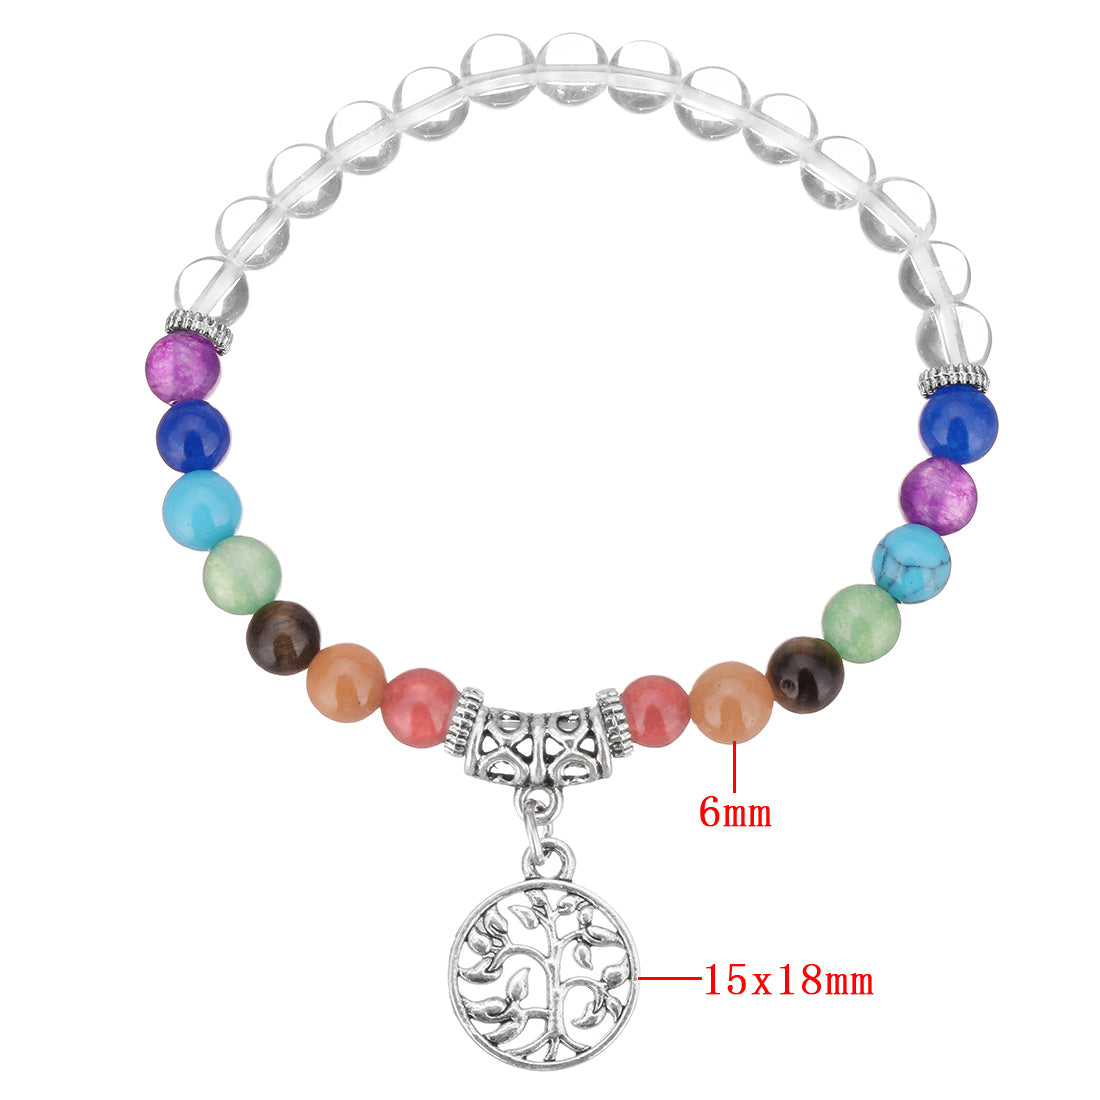 Clear Quartz Bracelet with Mixed Stones & Tree of Life Charm - 6mm Beads -Approx 8 Inch